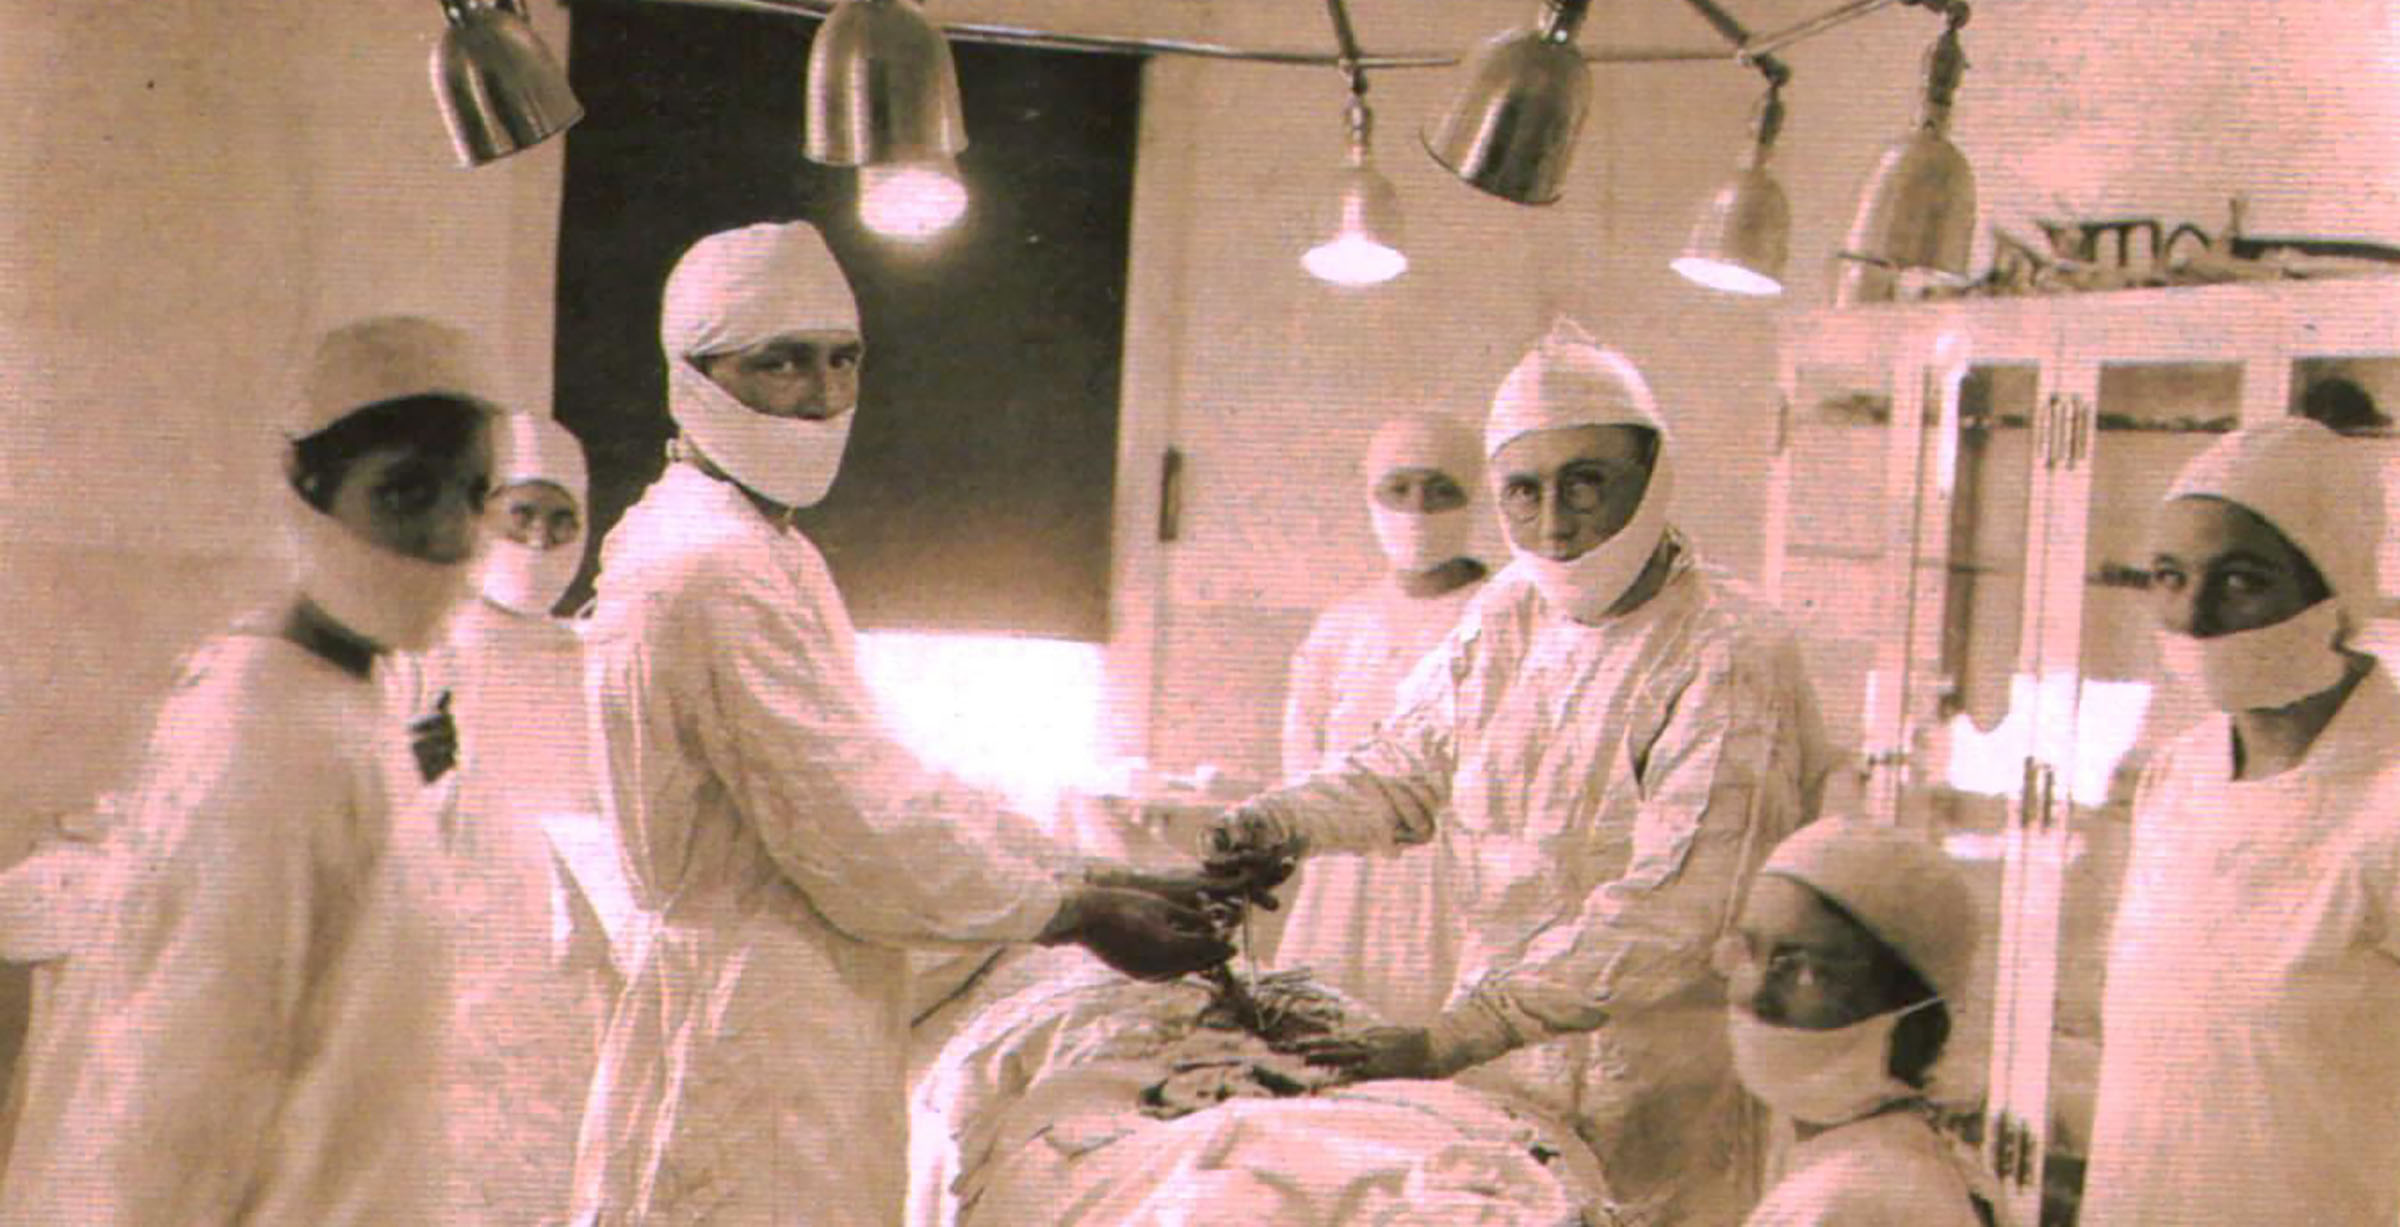 Seven people standing around a surgical table performing on a patient